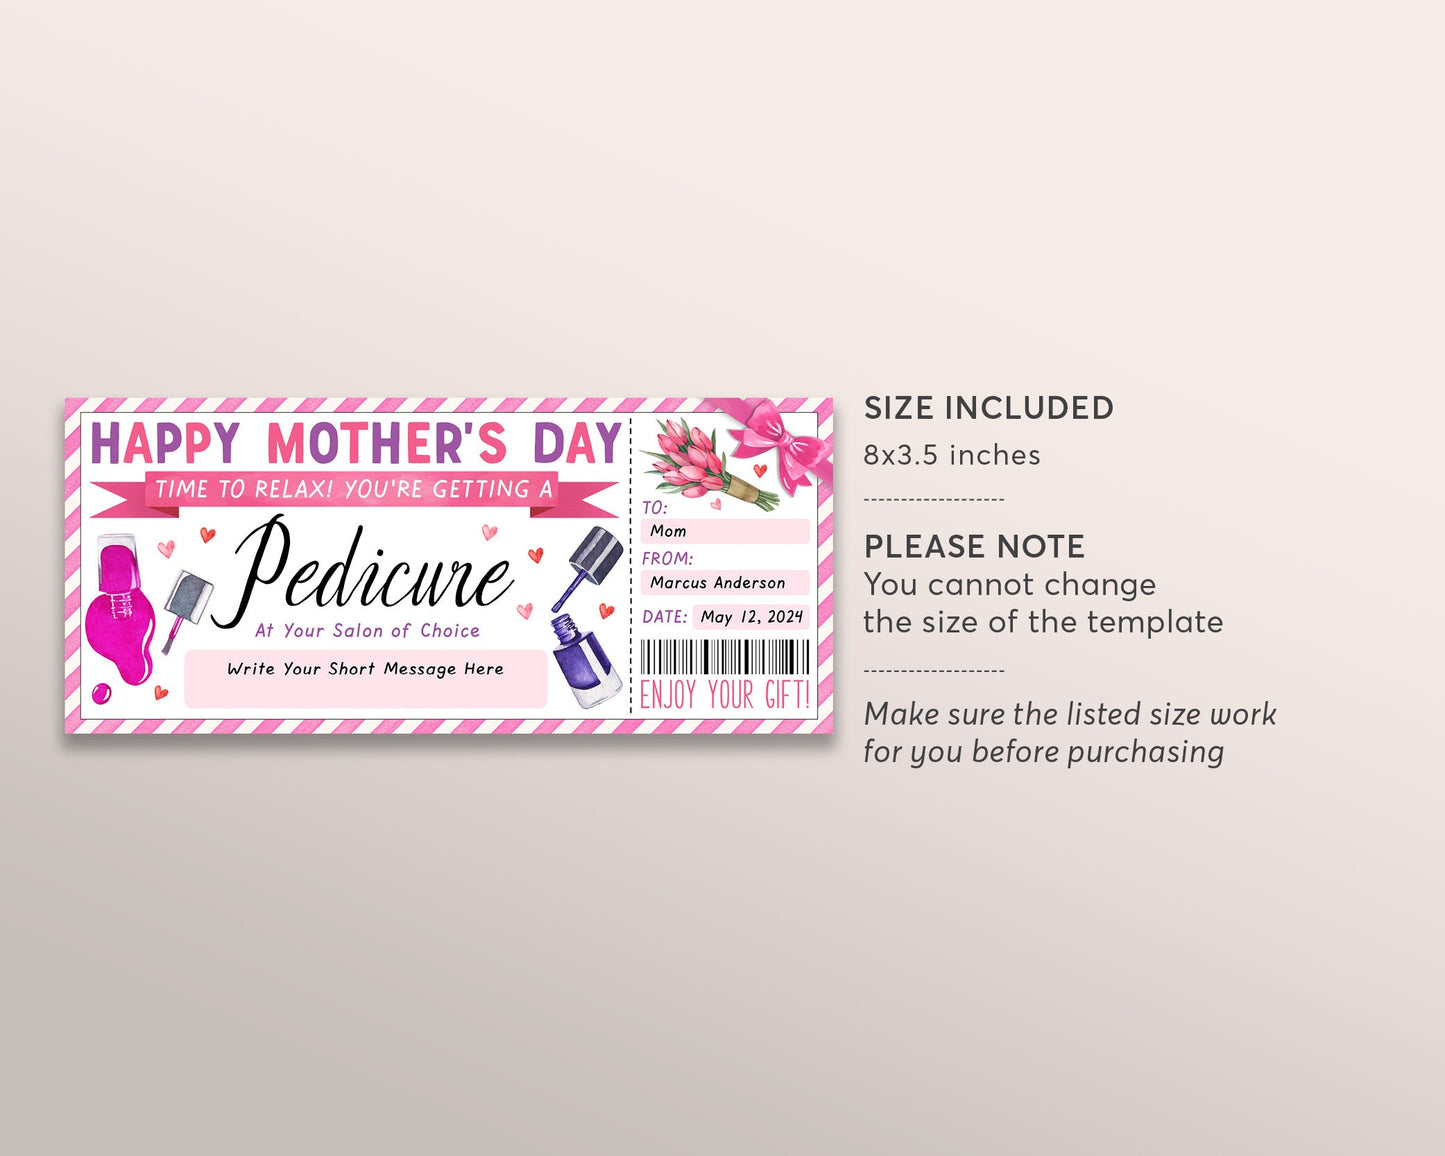 Mothers Day Pedicure Ticket Editable Template, Surprise Mani Pedi Gift Certificate For Mom, Nail Salon Spa Day Experience Voucher Coupon